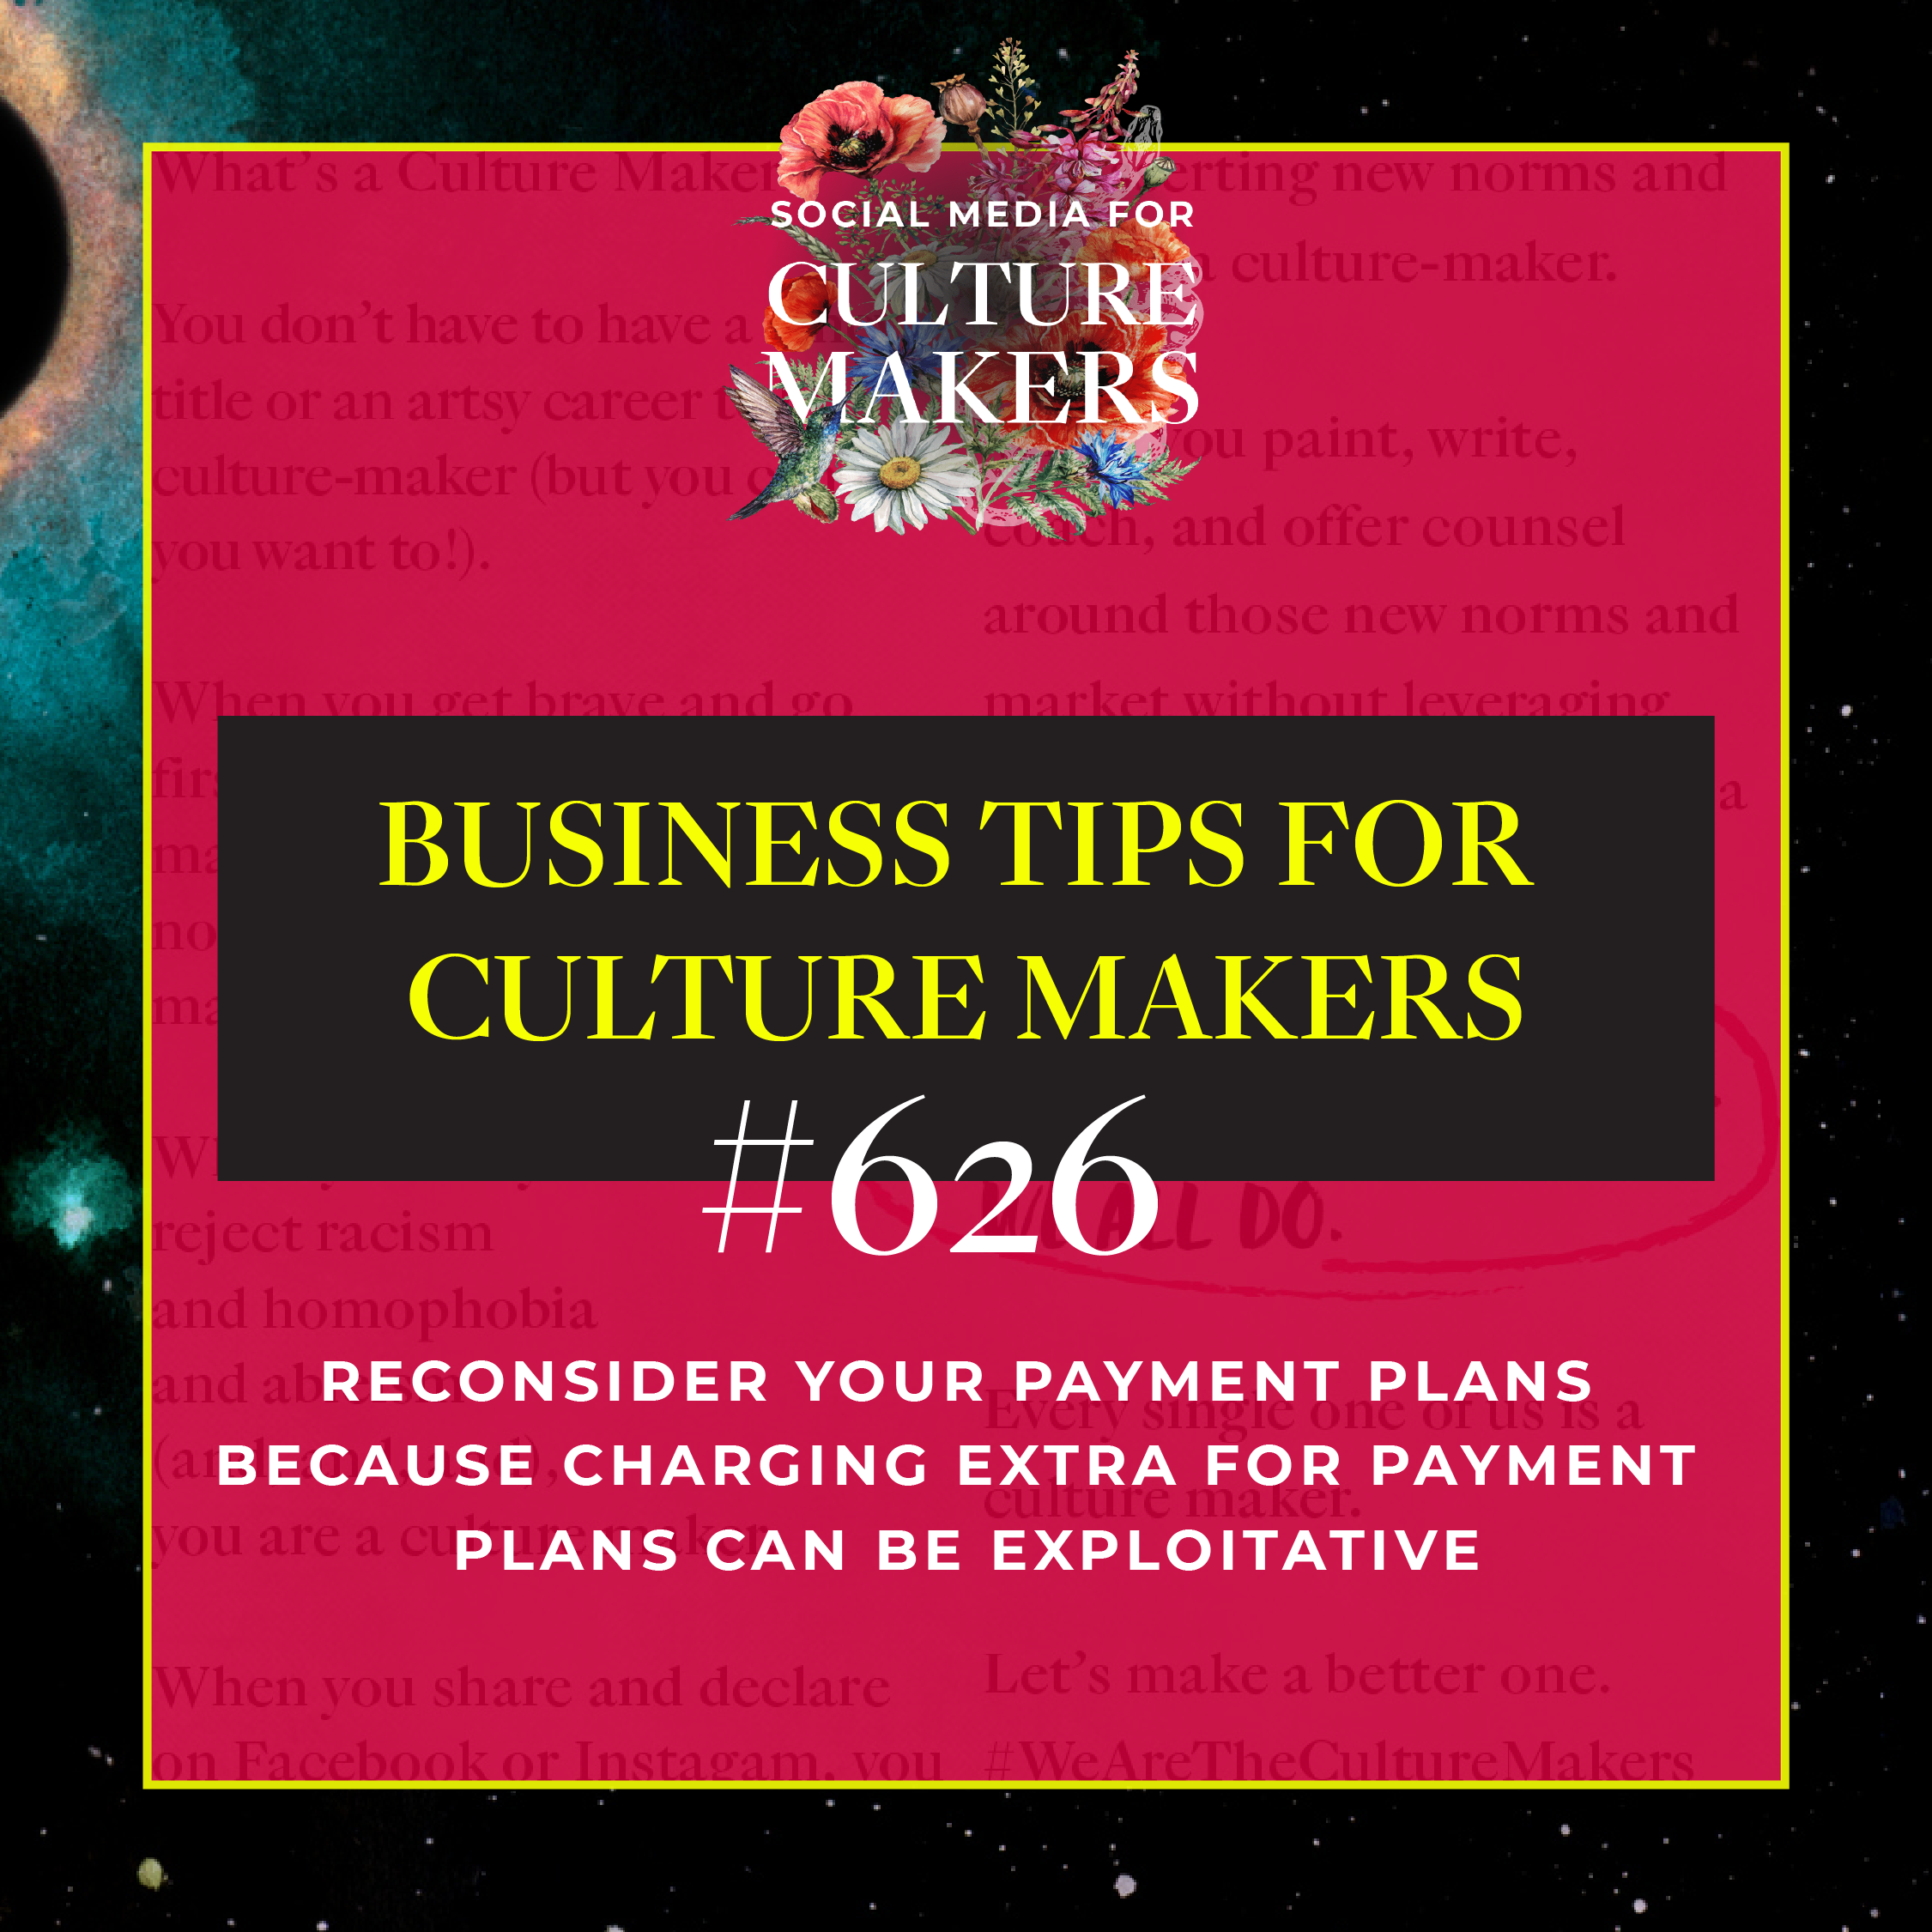 business tips for culture makers reconsider your payment plans